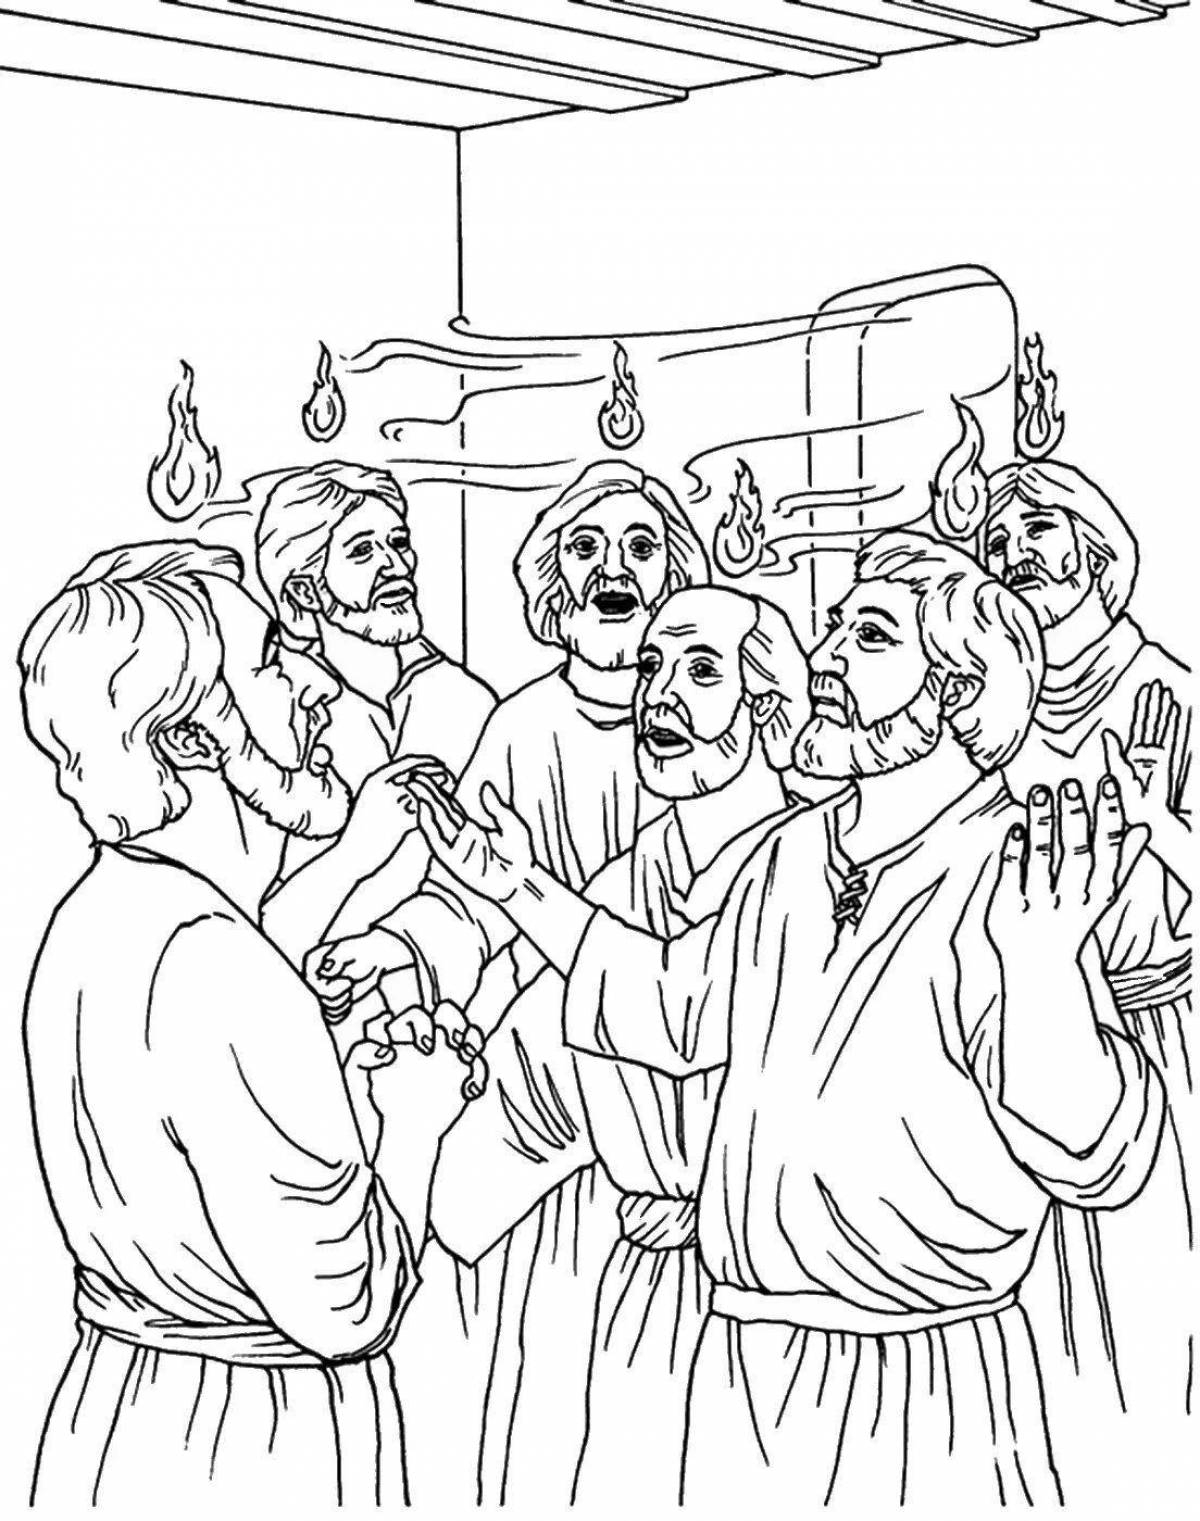 Fabulous trinity coloring pages for children